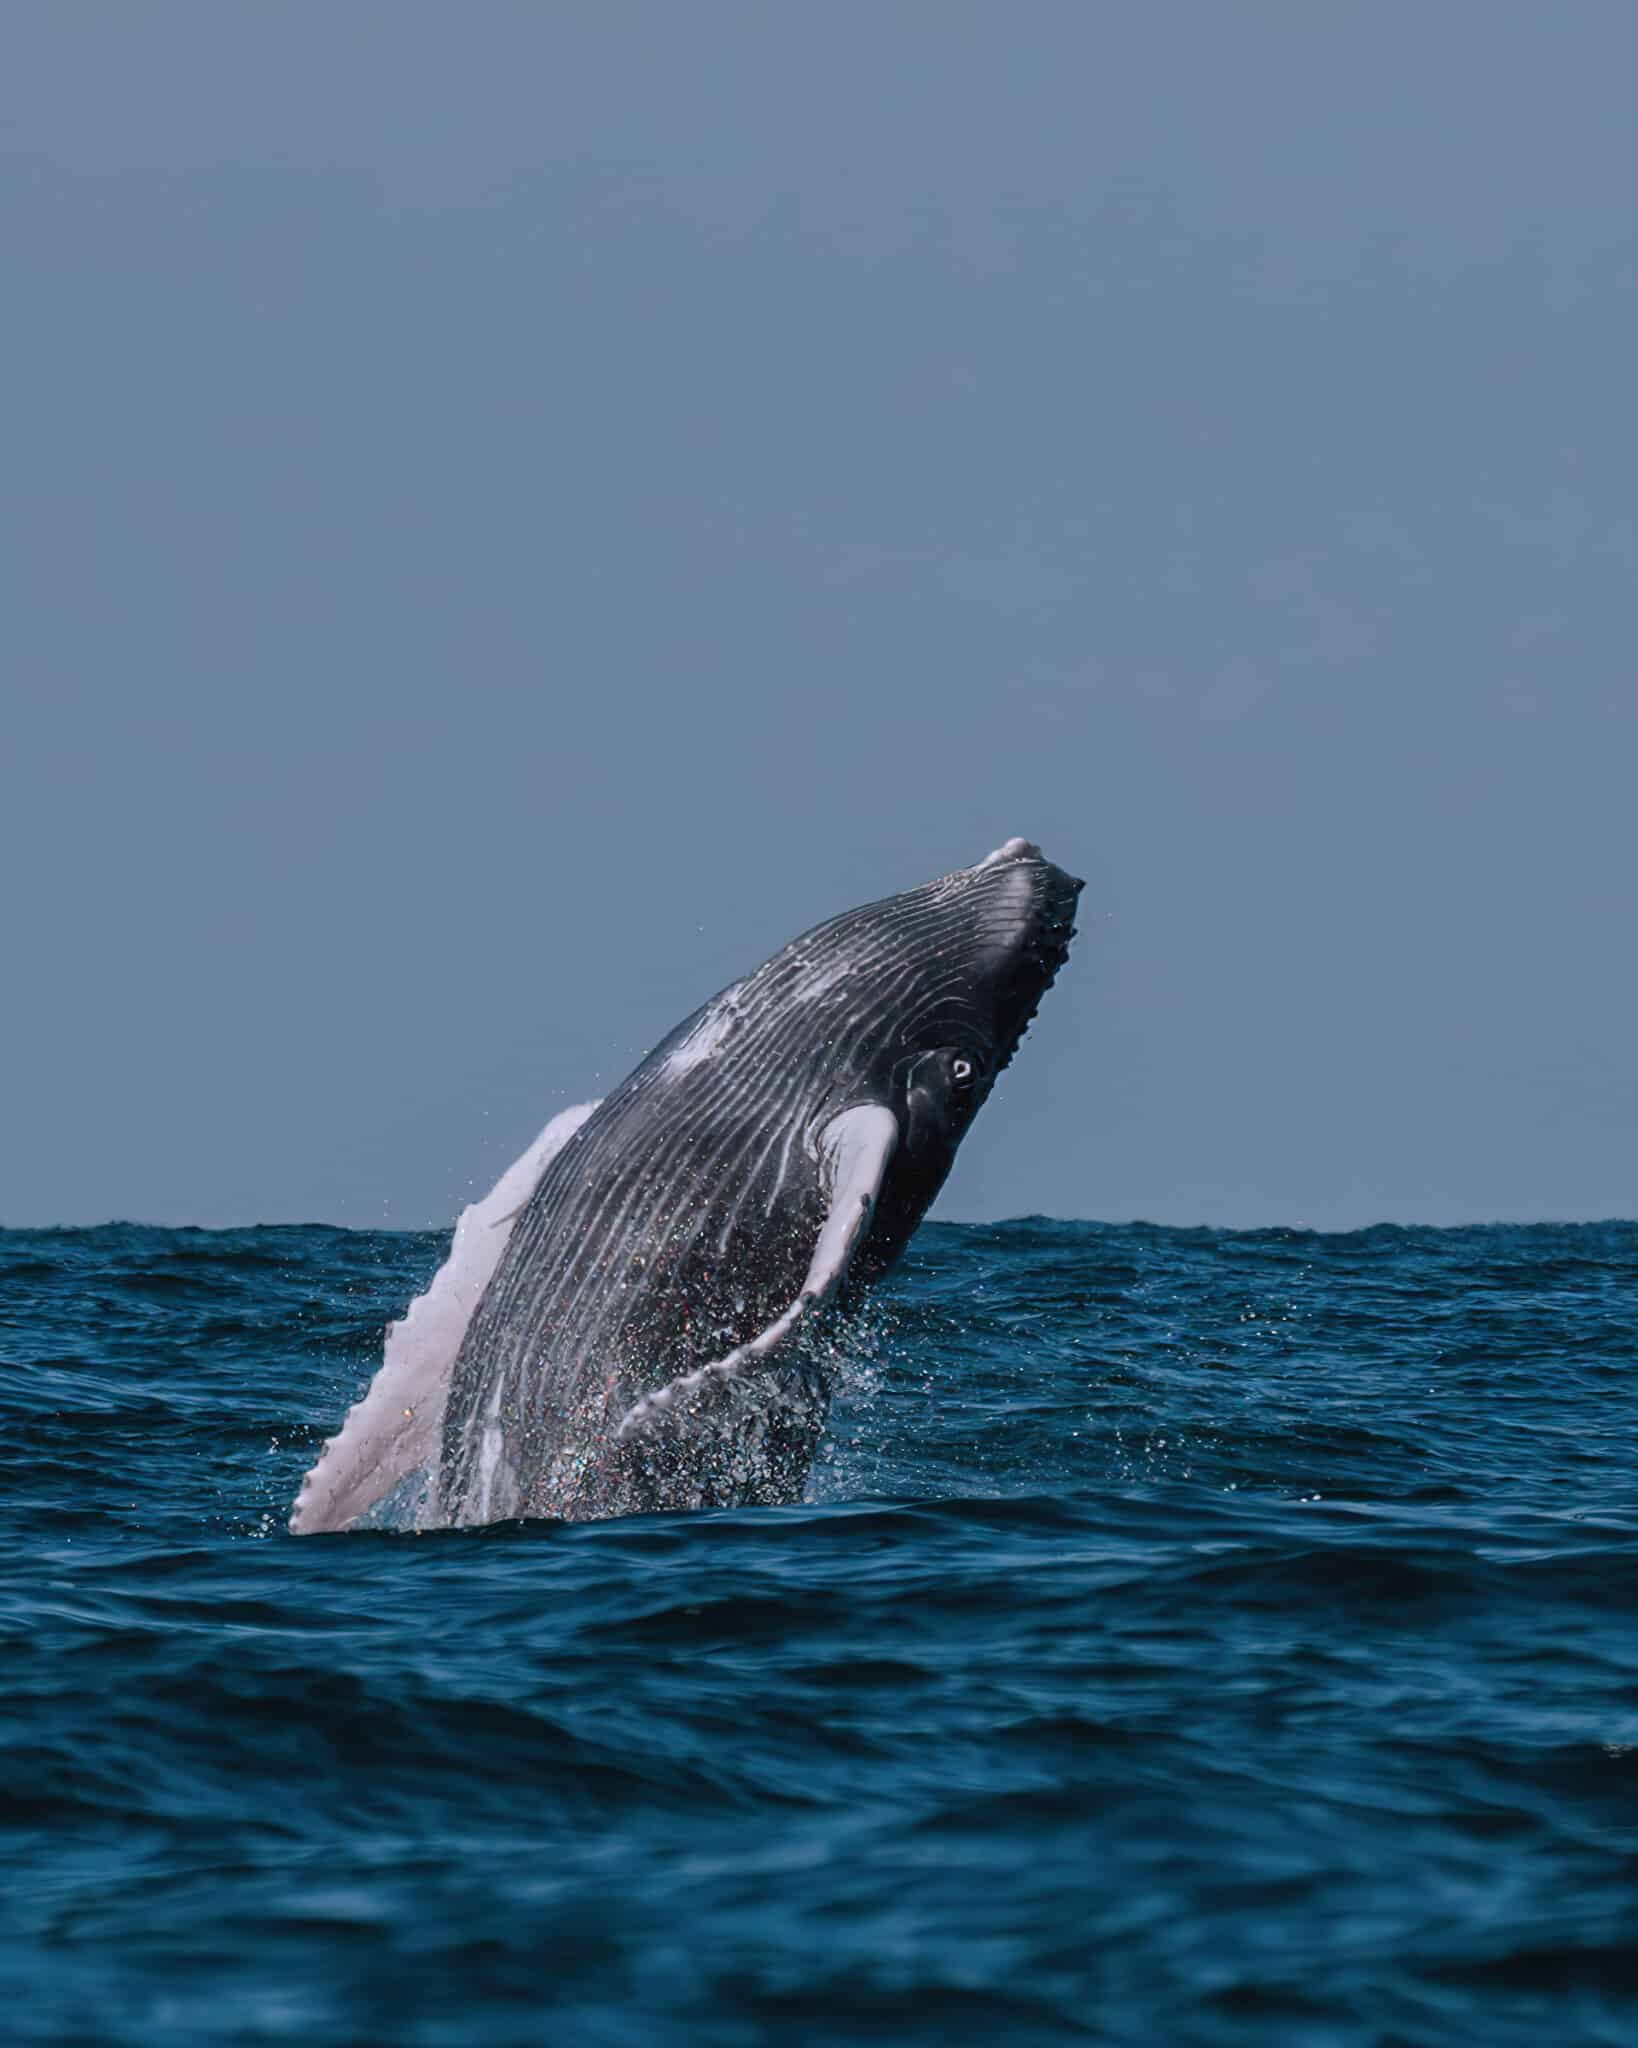 A humpback whale jumping out of the water in Uvita, Costa Rica.